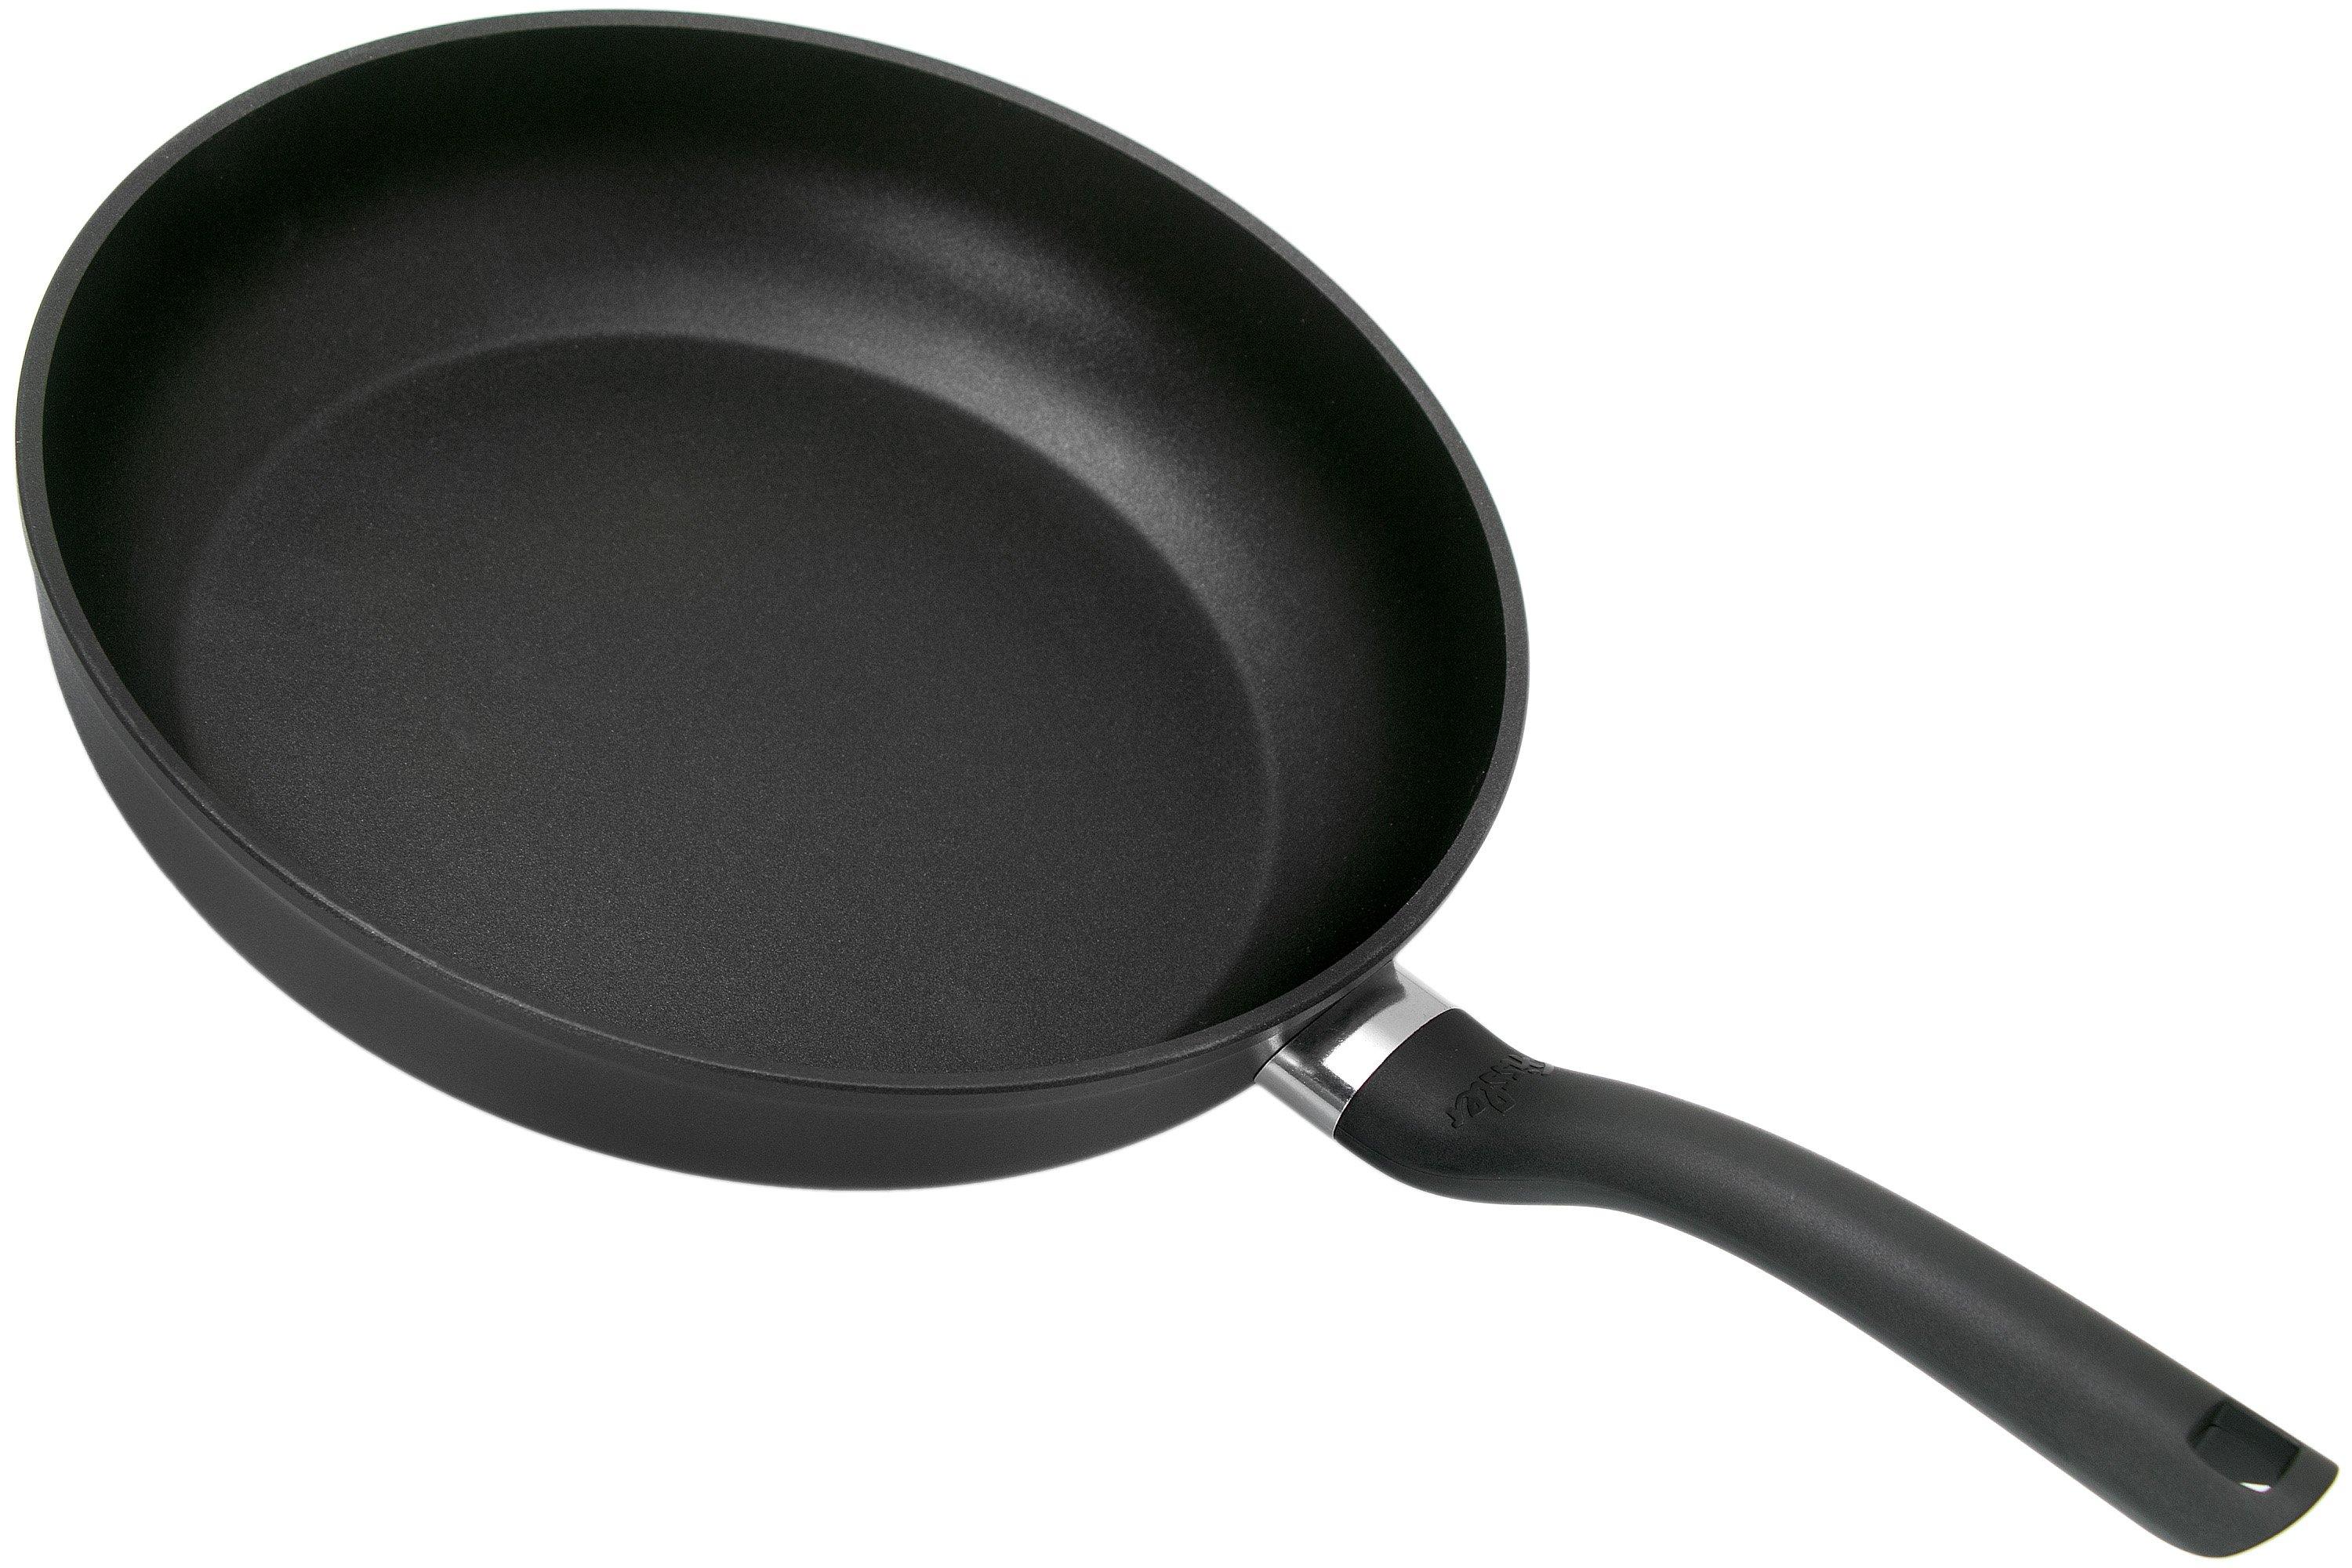 Fissler Cenit Induction frying cm at 045-301-28-100, Advantageously 28 | pan shopping